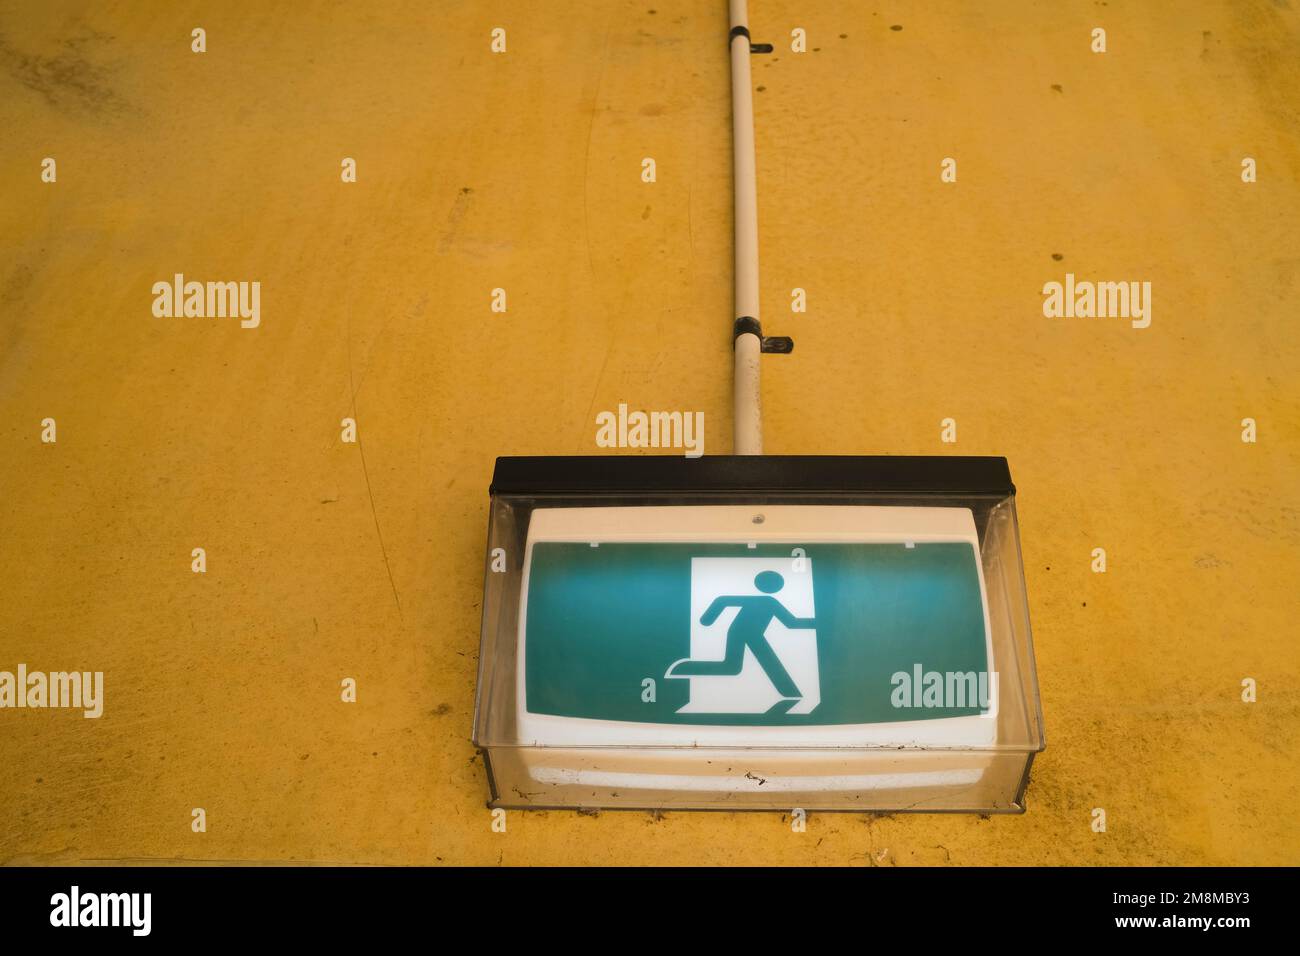 Running Man Emergency Exit sign on dirty wall Stock Photo